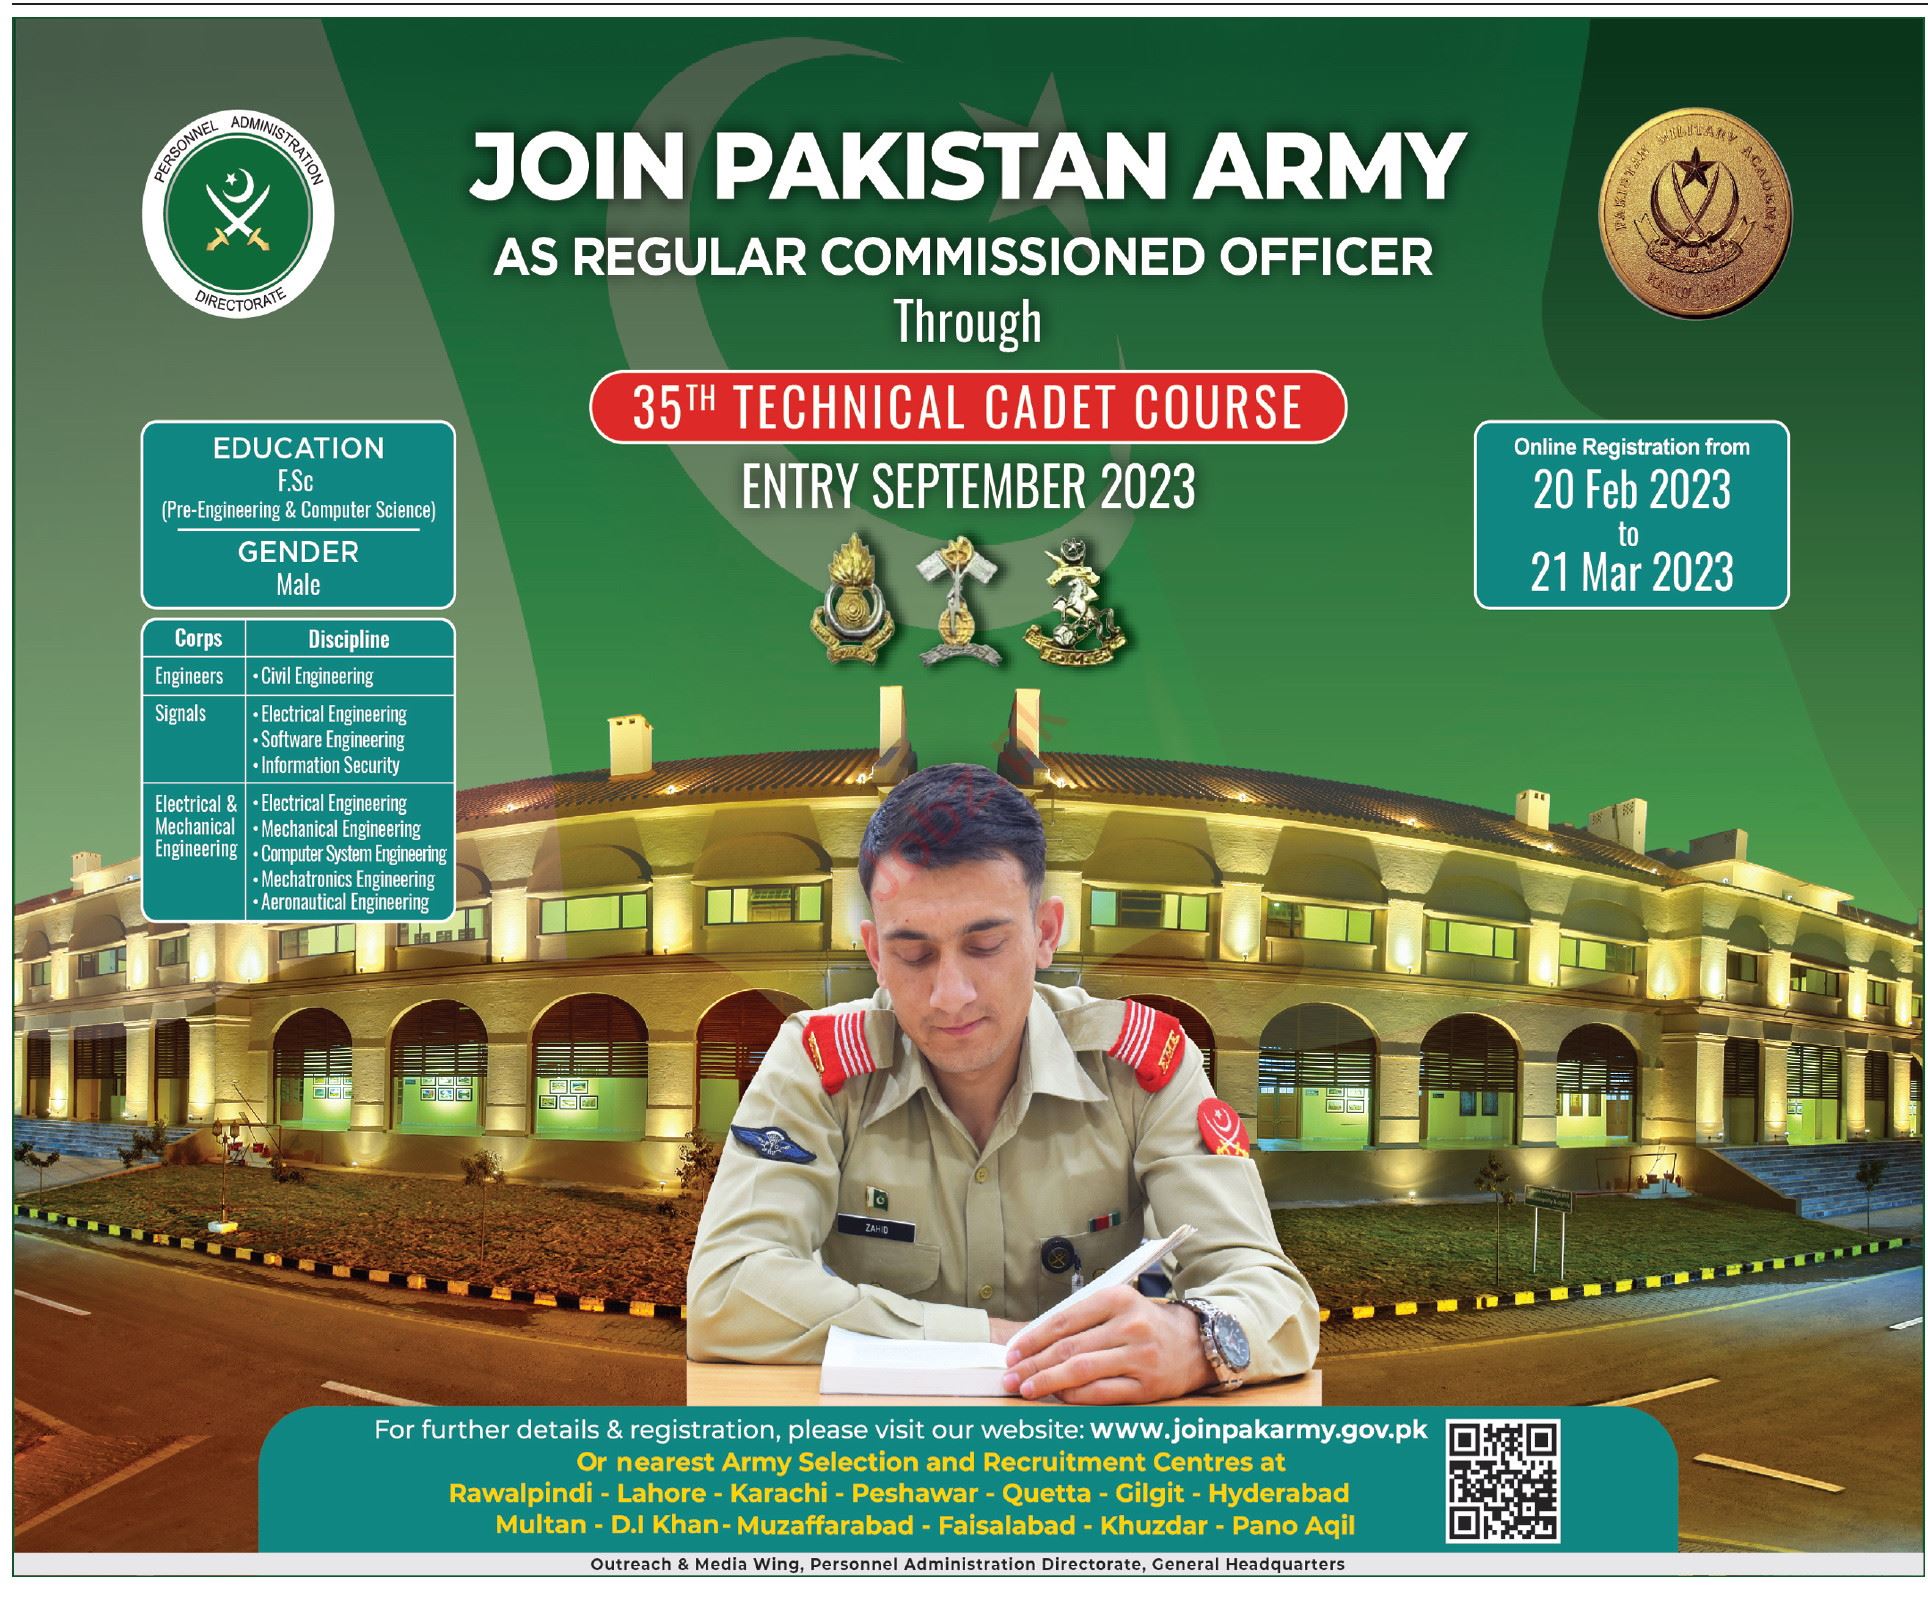 Pakistan Army Jobs 2023 as Regular Commissioned Officer